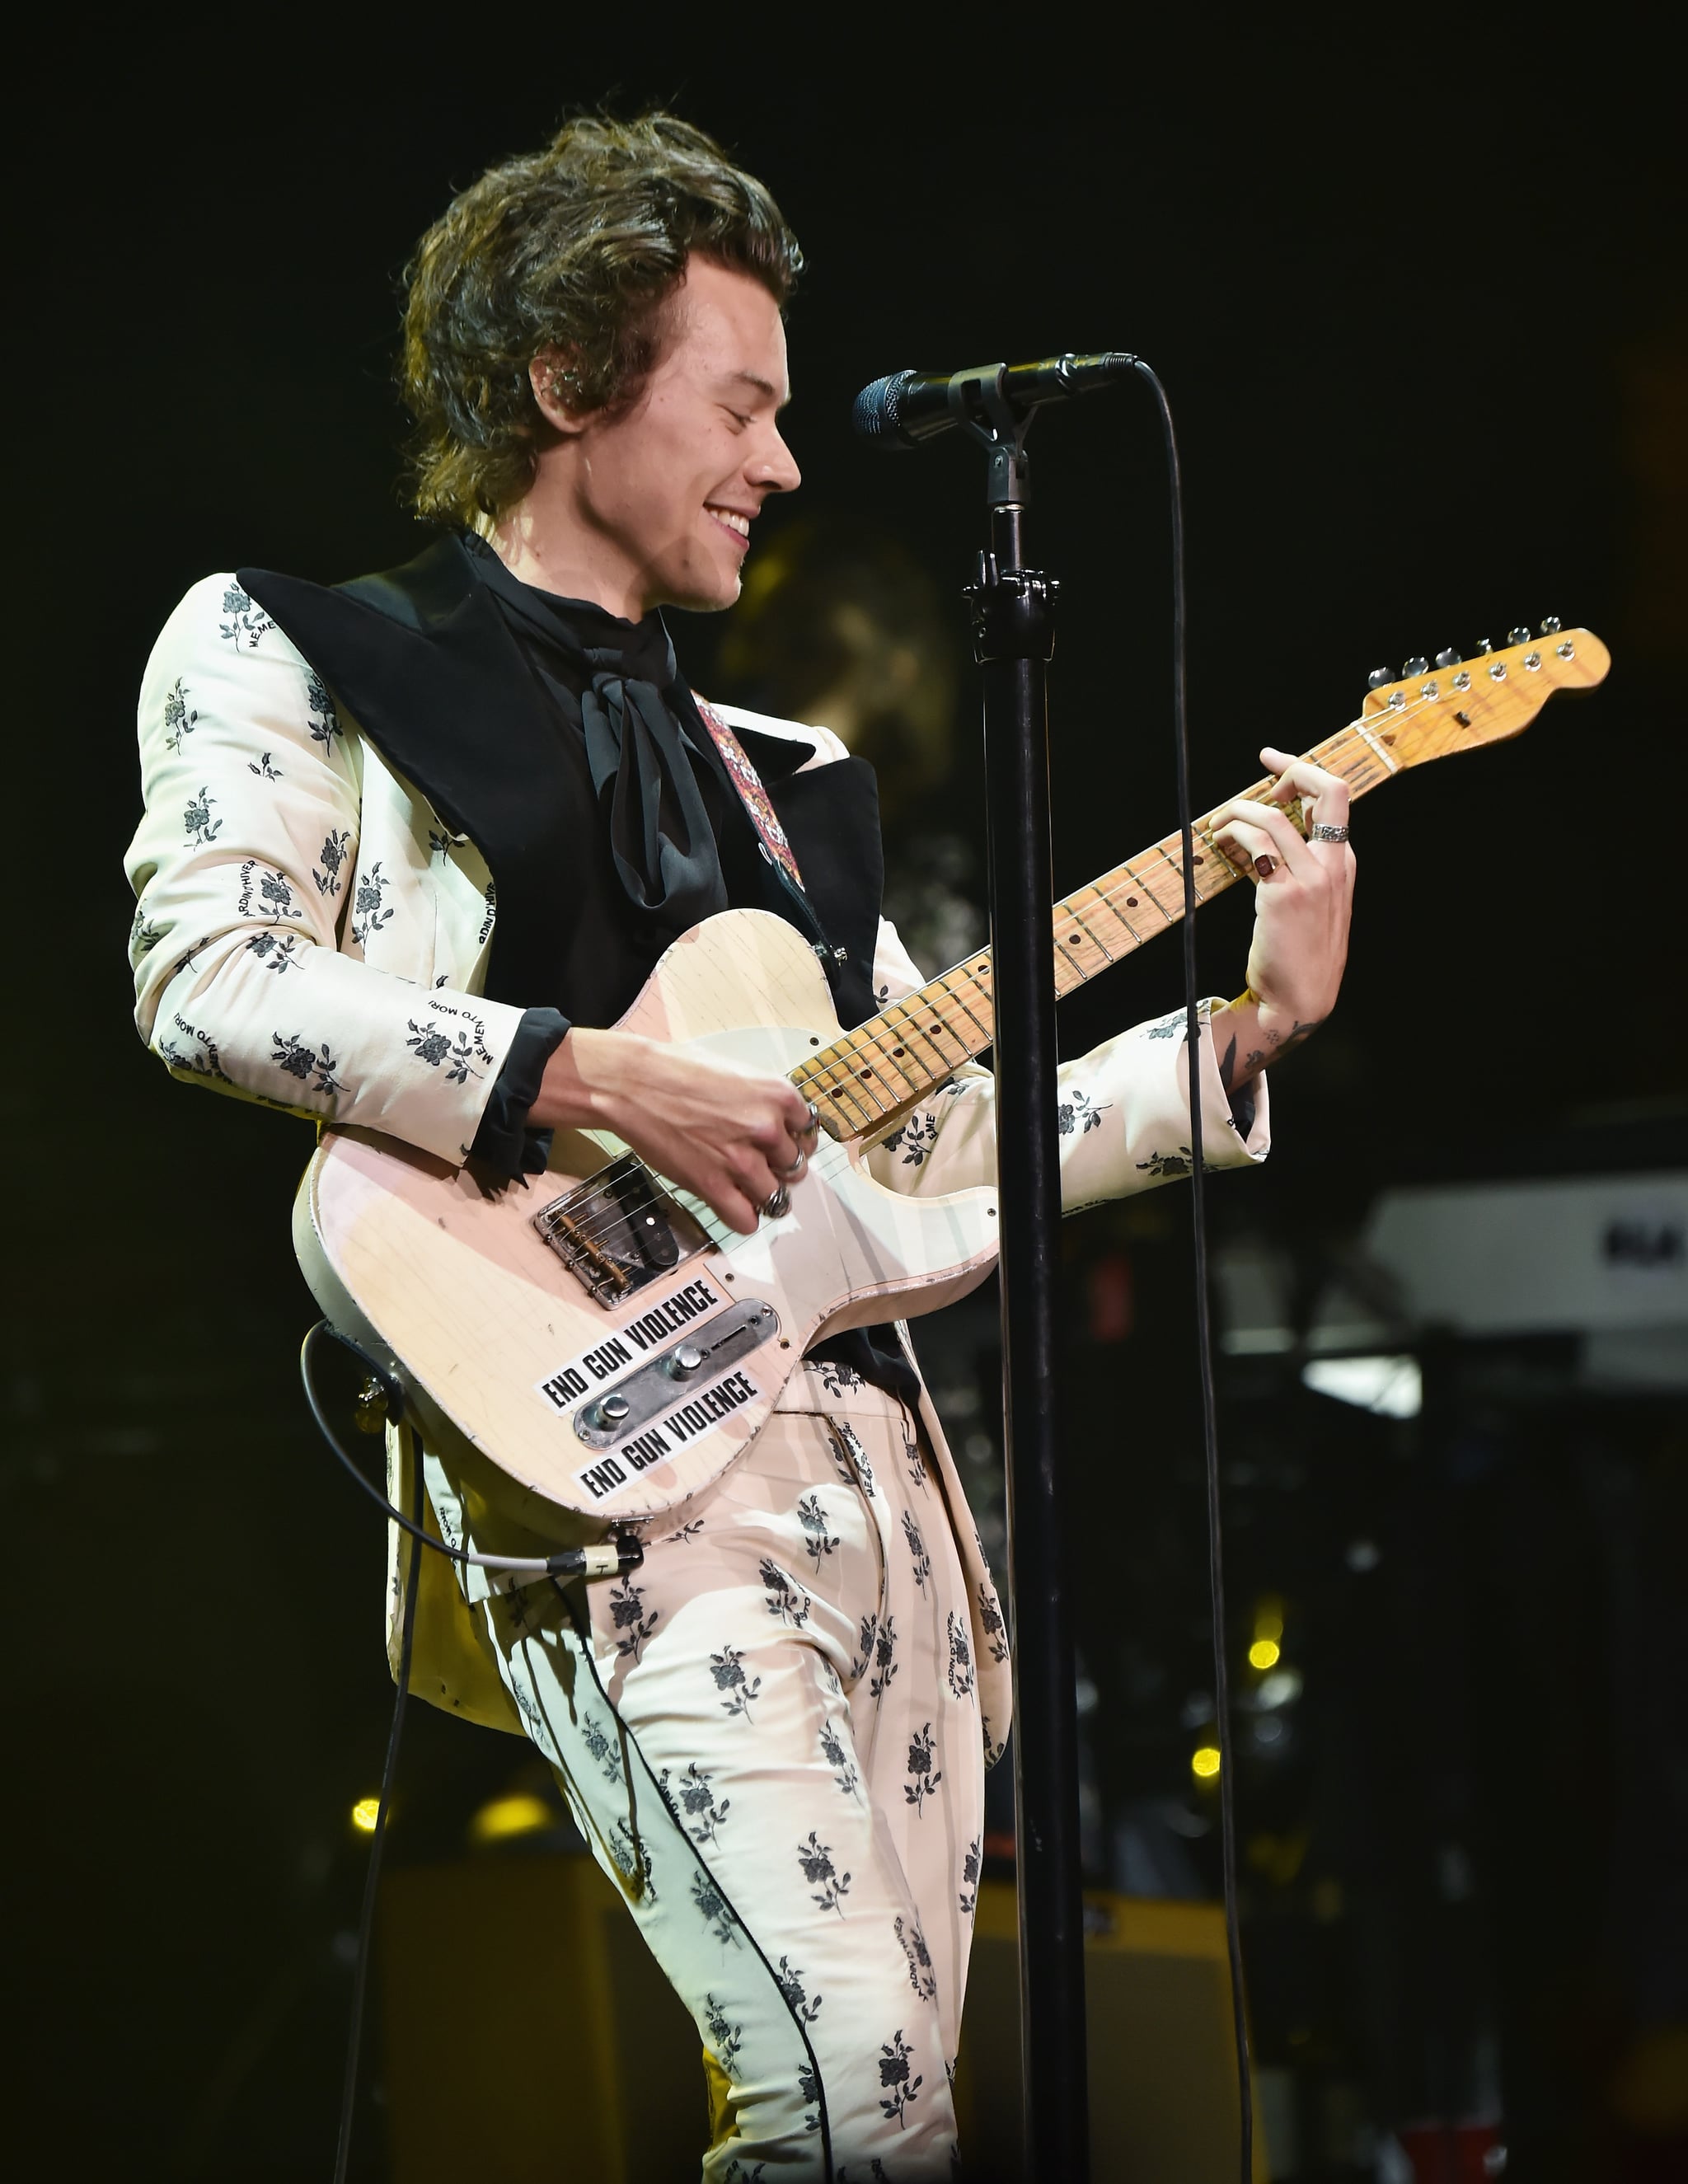 NEW YORK, NY - JUNE 21:  Harry Styles plays a guitar with the words 